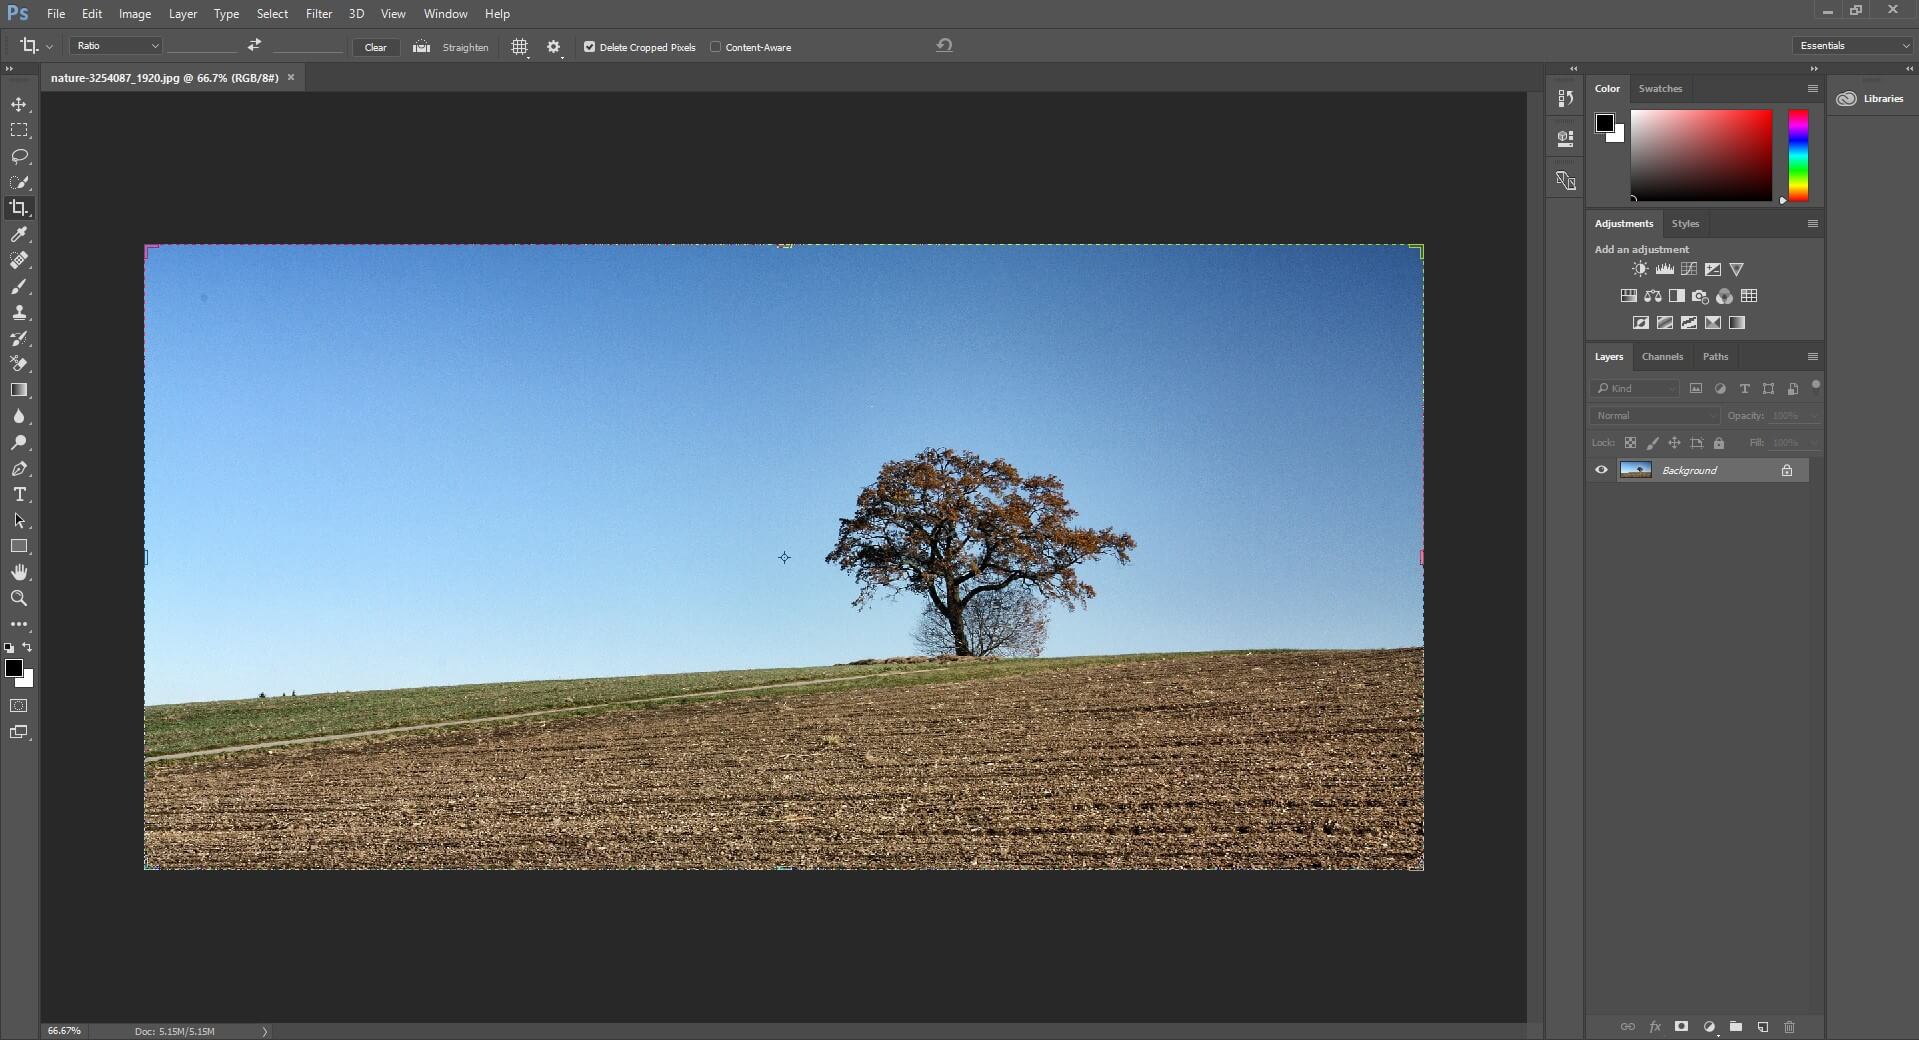 Open your image file with Adobe Photoshop CC